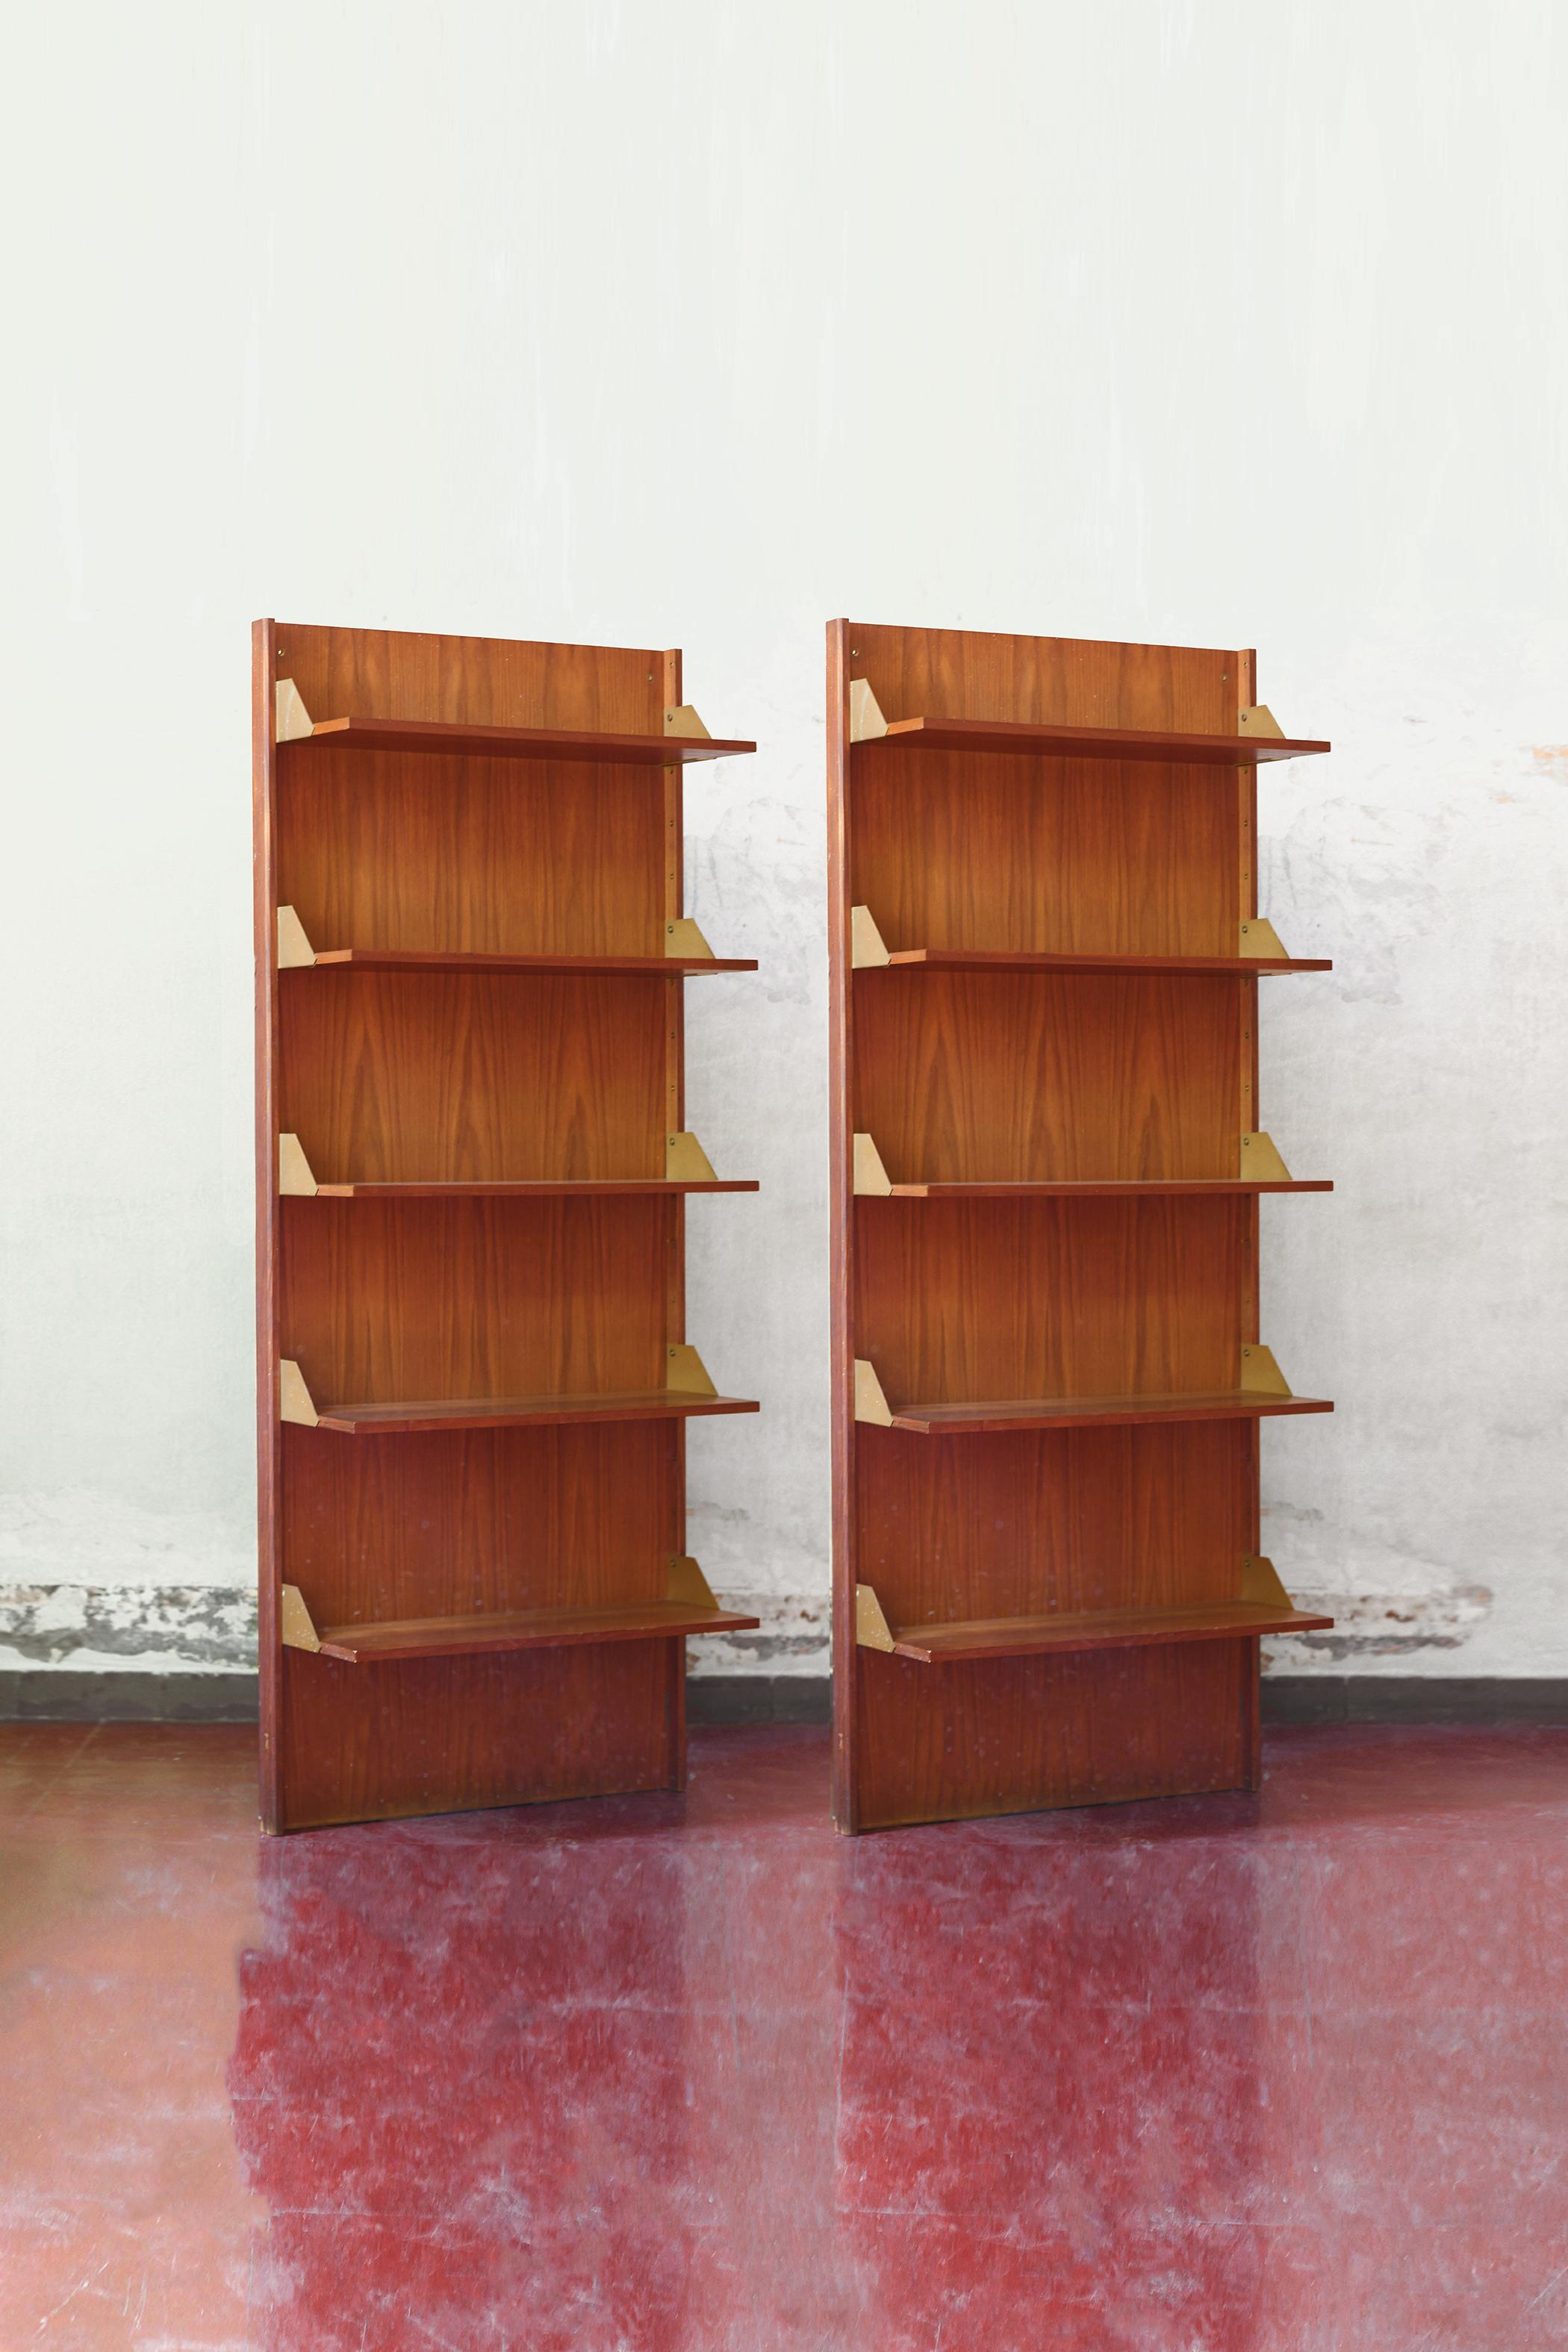 Pair of wood bookcases with brass details from the 1960s
Product details
Dimensions 84 W x 205 H × 33 D cm